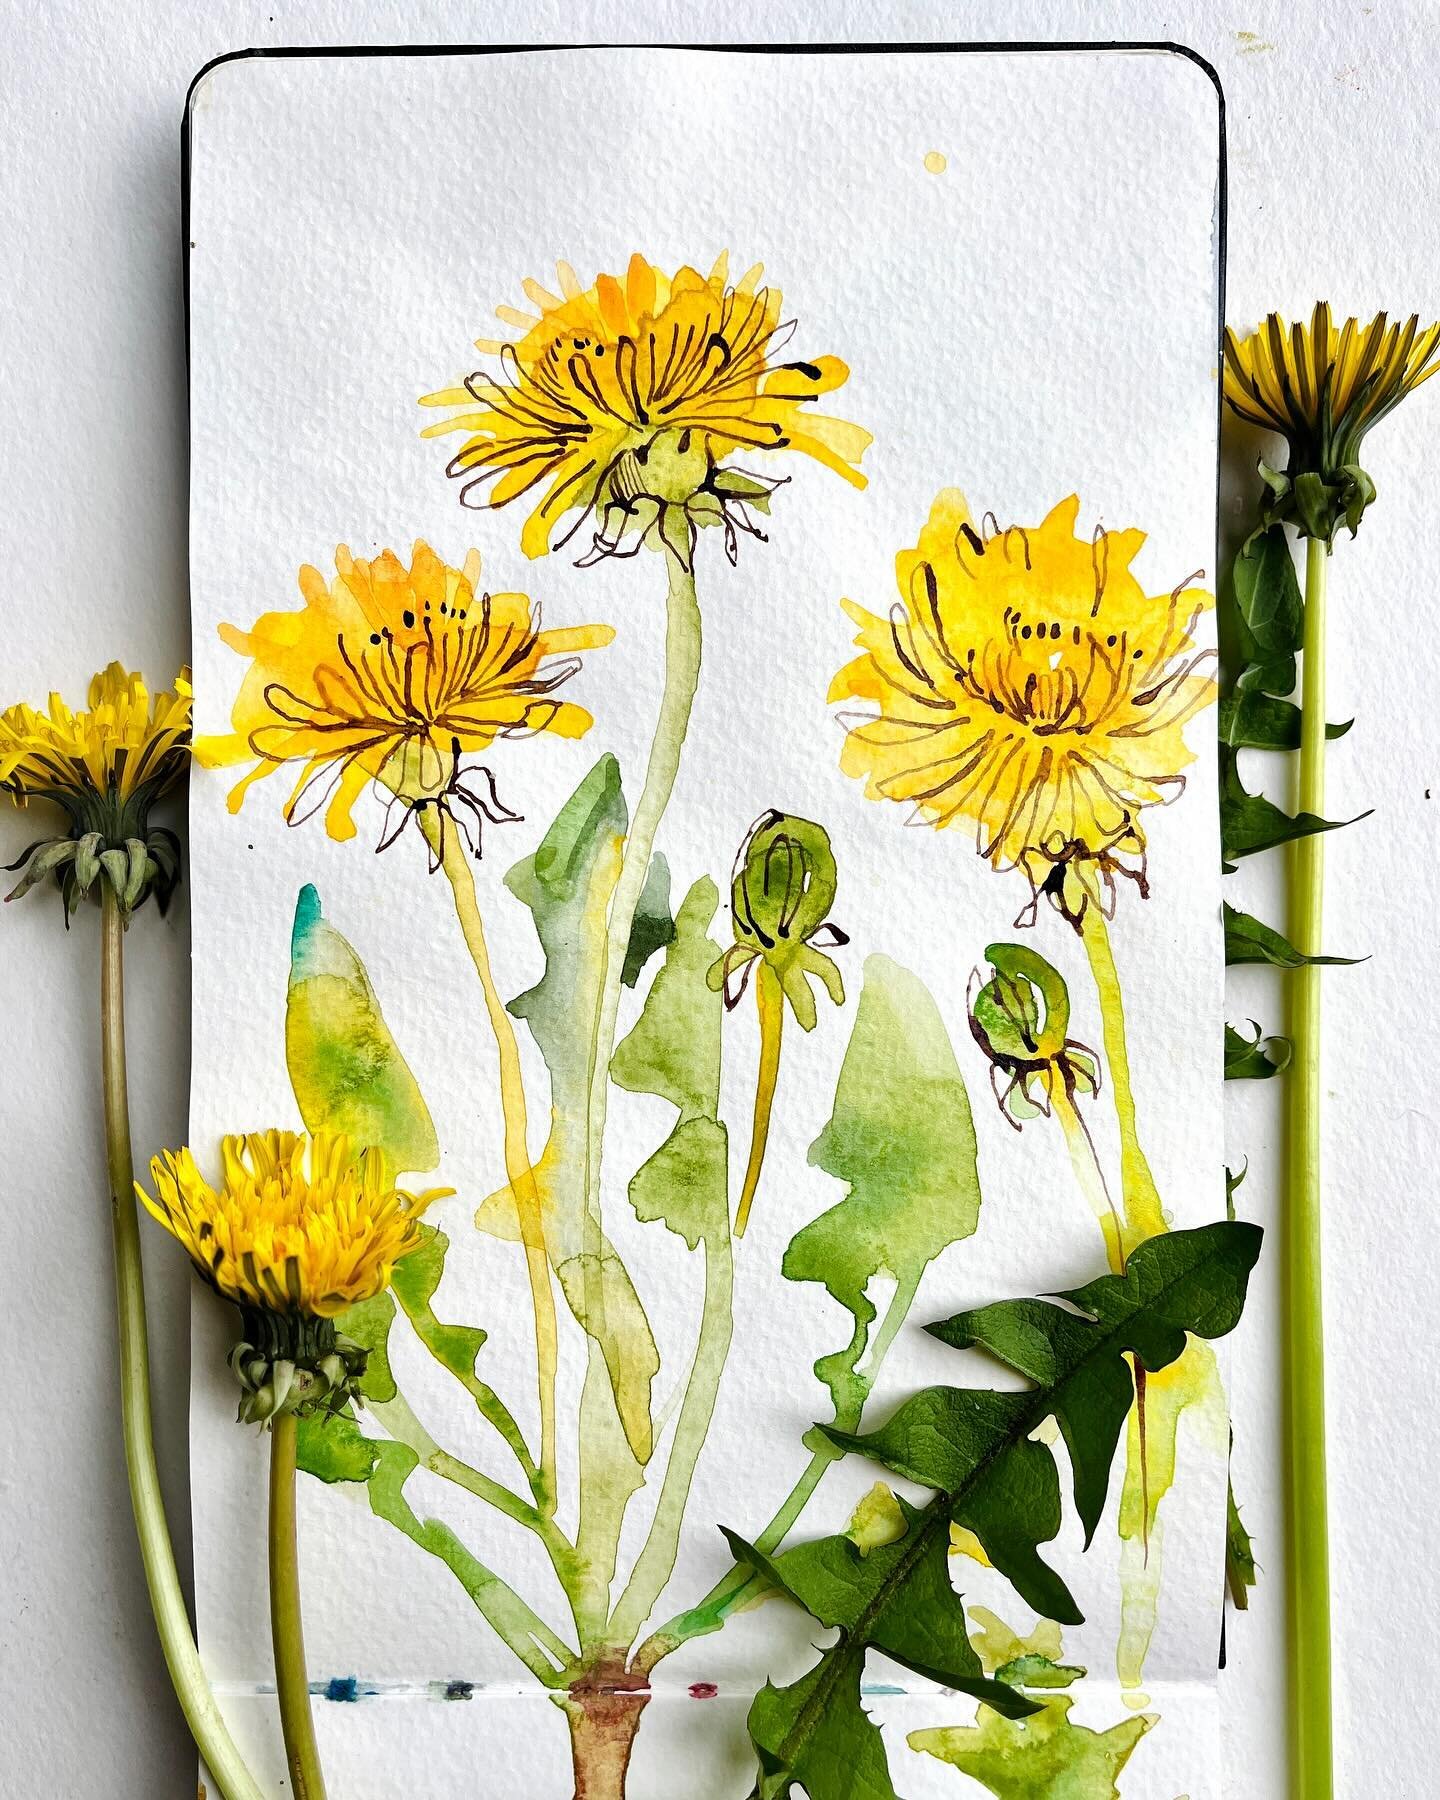 #throwbackthursday 🌼Four years ago this week marks the beginning of my journey with this wildflowers sketchbook, also known as my Covid companion - this was the first page. As many of you may recall from the lockdown period, any outings were confine